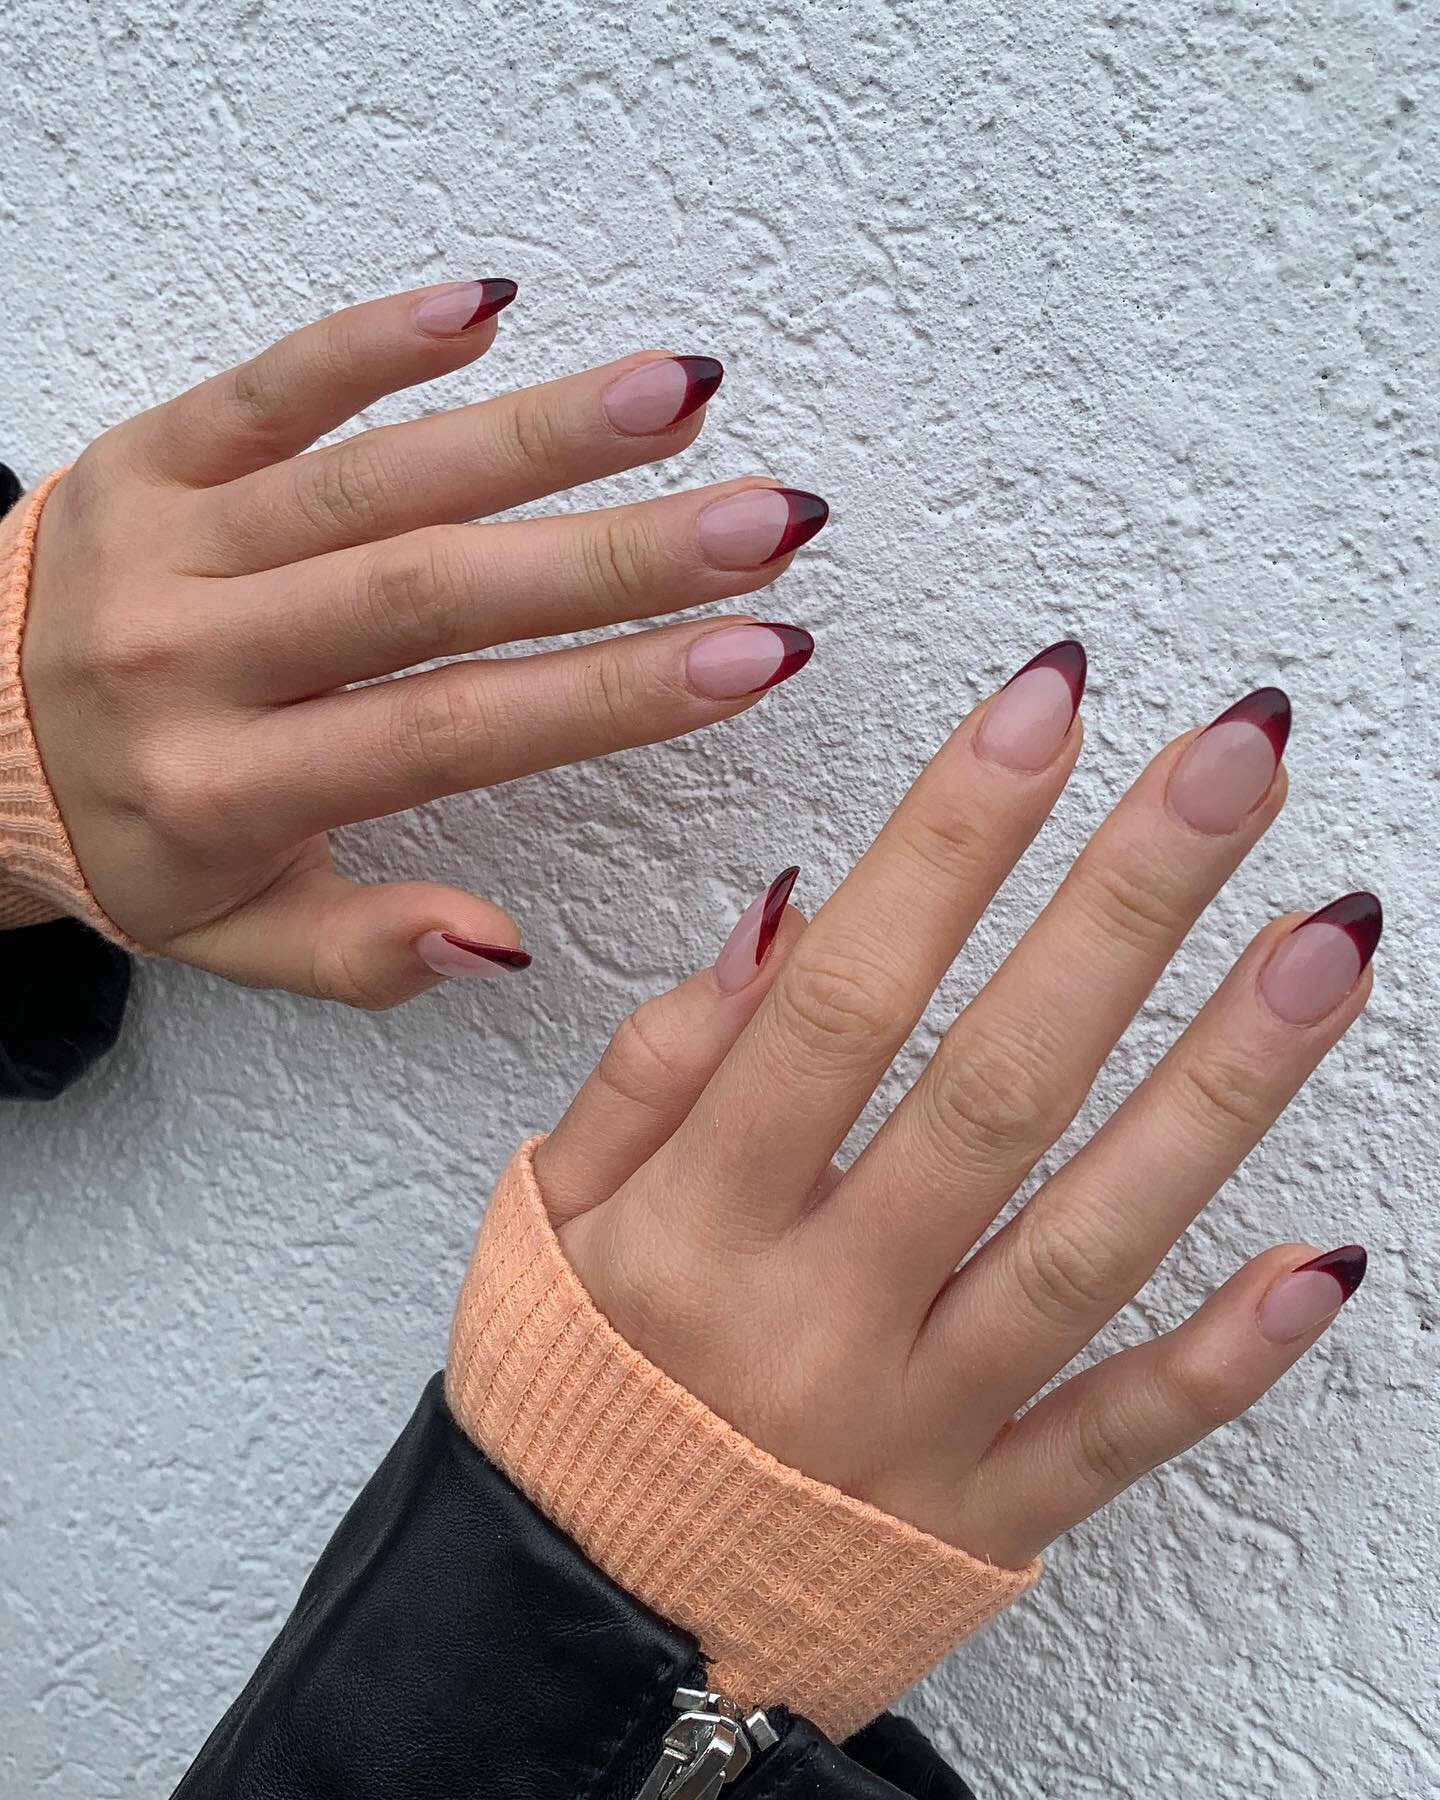 🍷 ₜᵢₚₛ

Online BOOKING available, link in BIO or www.LuxyNails.ca 

Plan ahead for the holidays 🎄

#fallnails #winetips #winetime #redwine #darkscarlett #frenchtipnails #LuxyNAILSeries